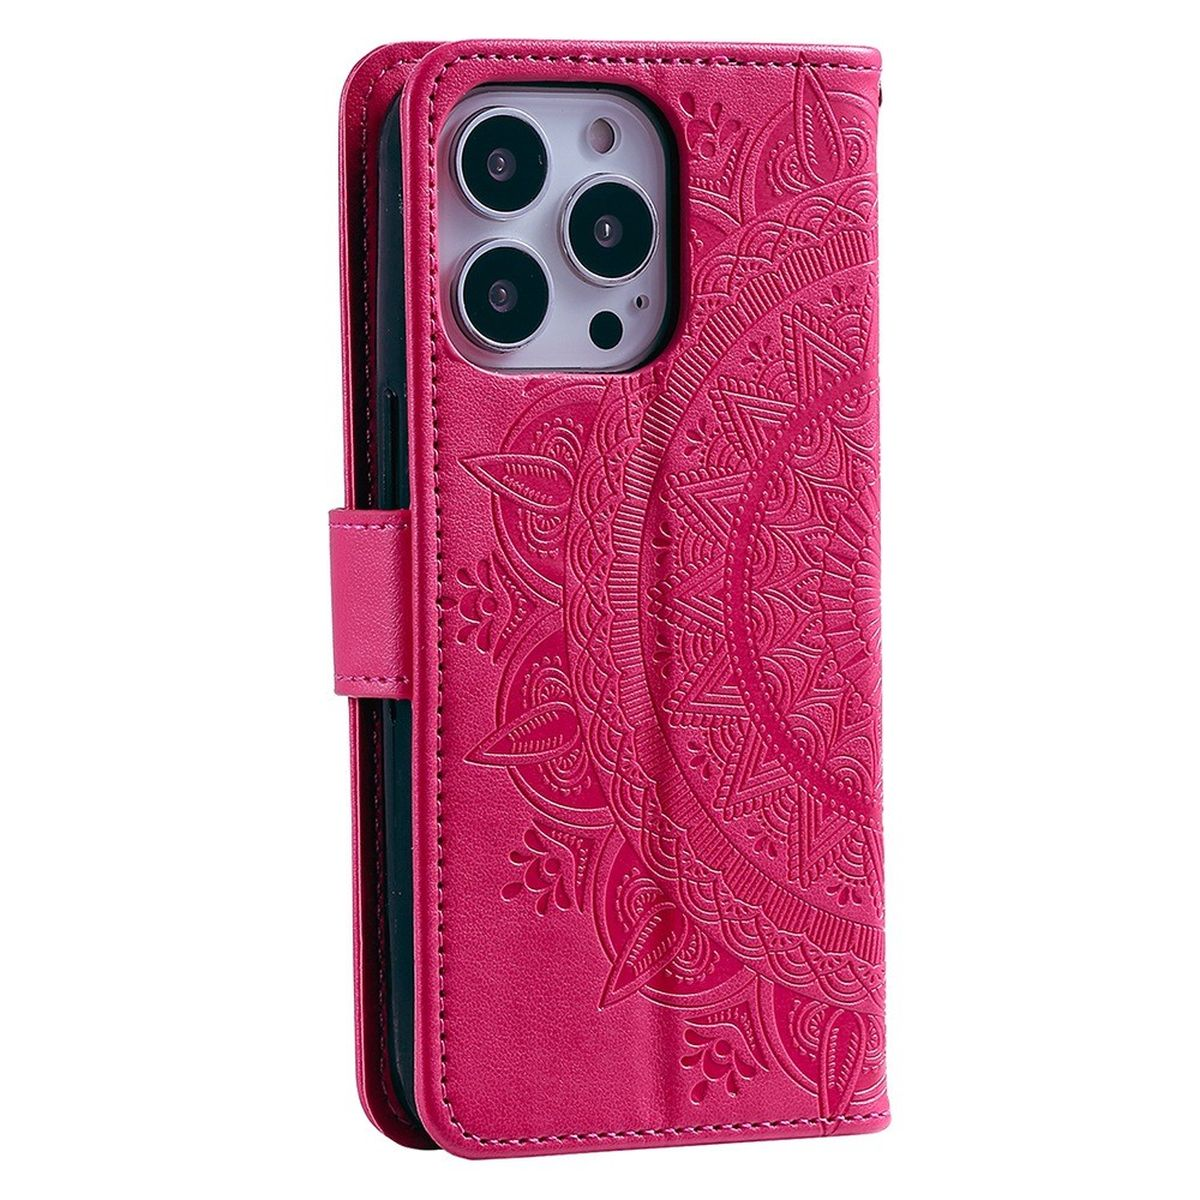 COVERKINGZ Pro, Apple, Mandala mit Bookcover, Klapphülle Pink Muster, 14 iPhone